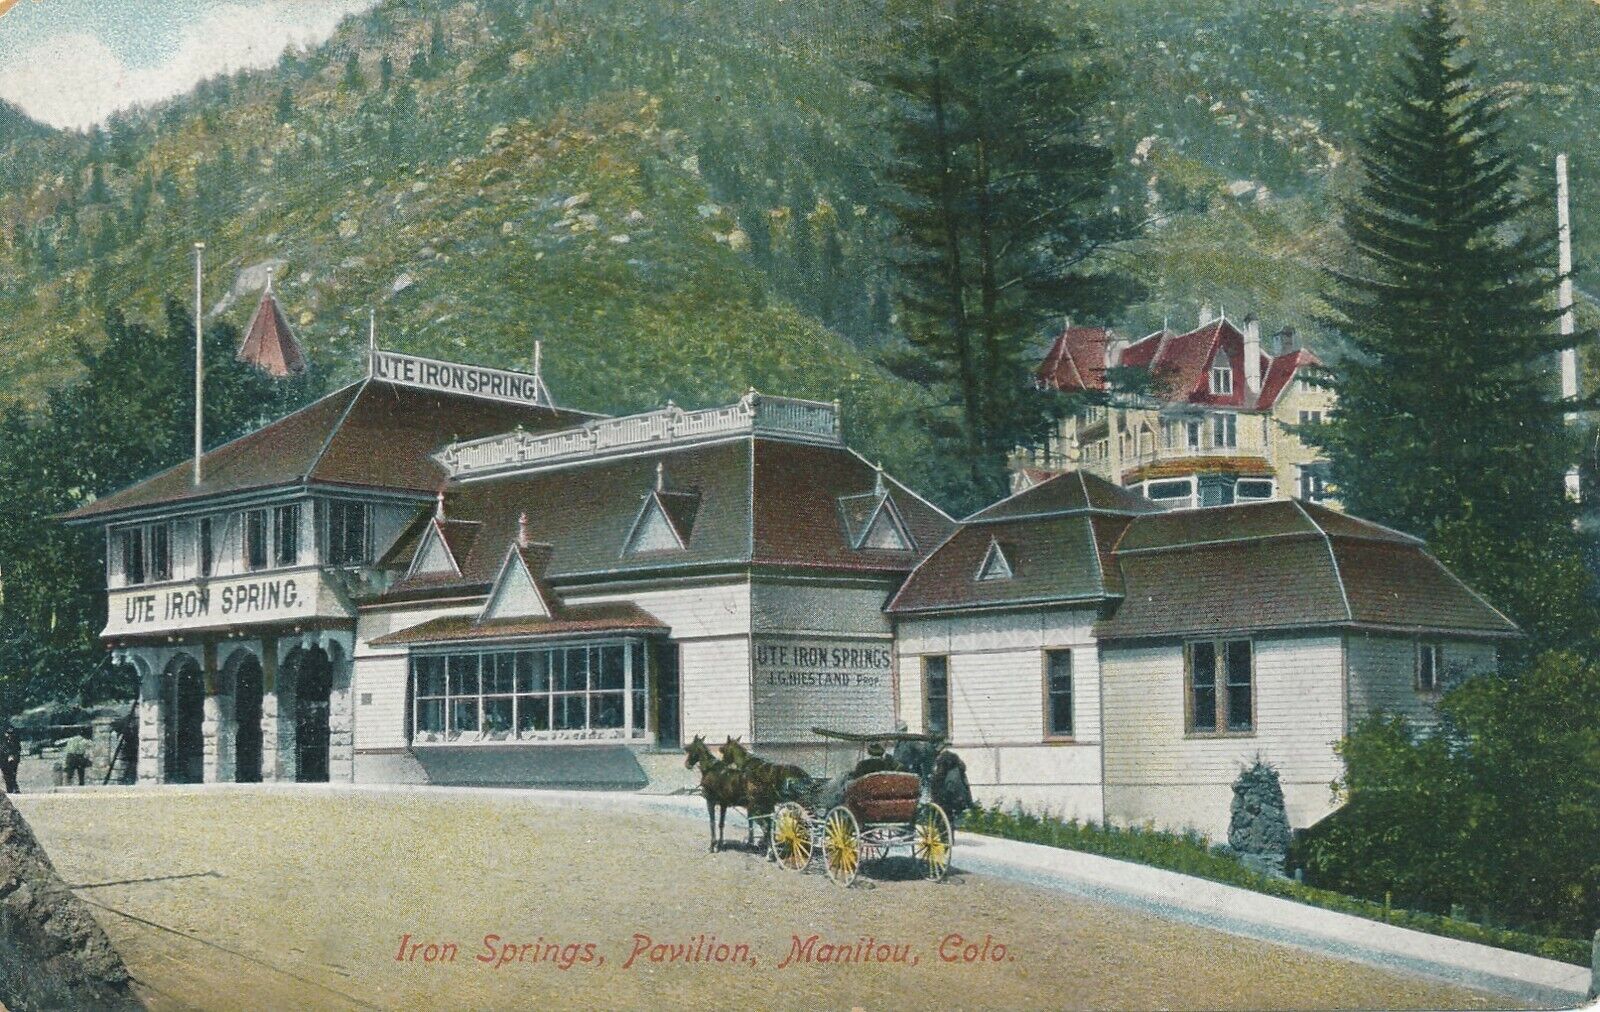 MANITOU CO – Iron Springs Pavilion showing Horse and Carriage